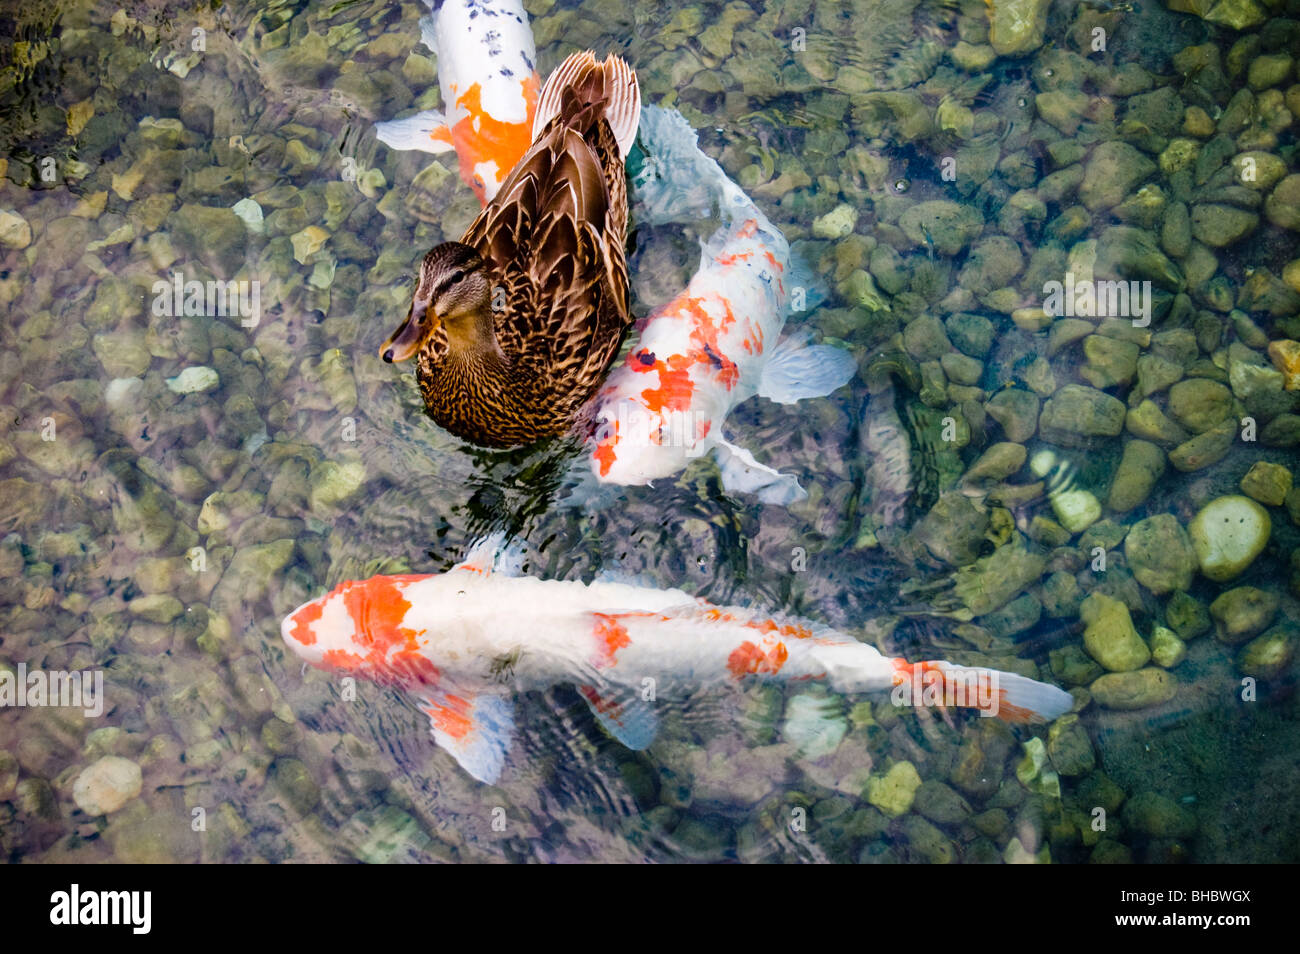 A duck and fish swim in a pond. Stock Photo